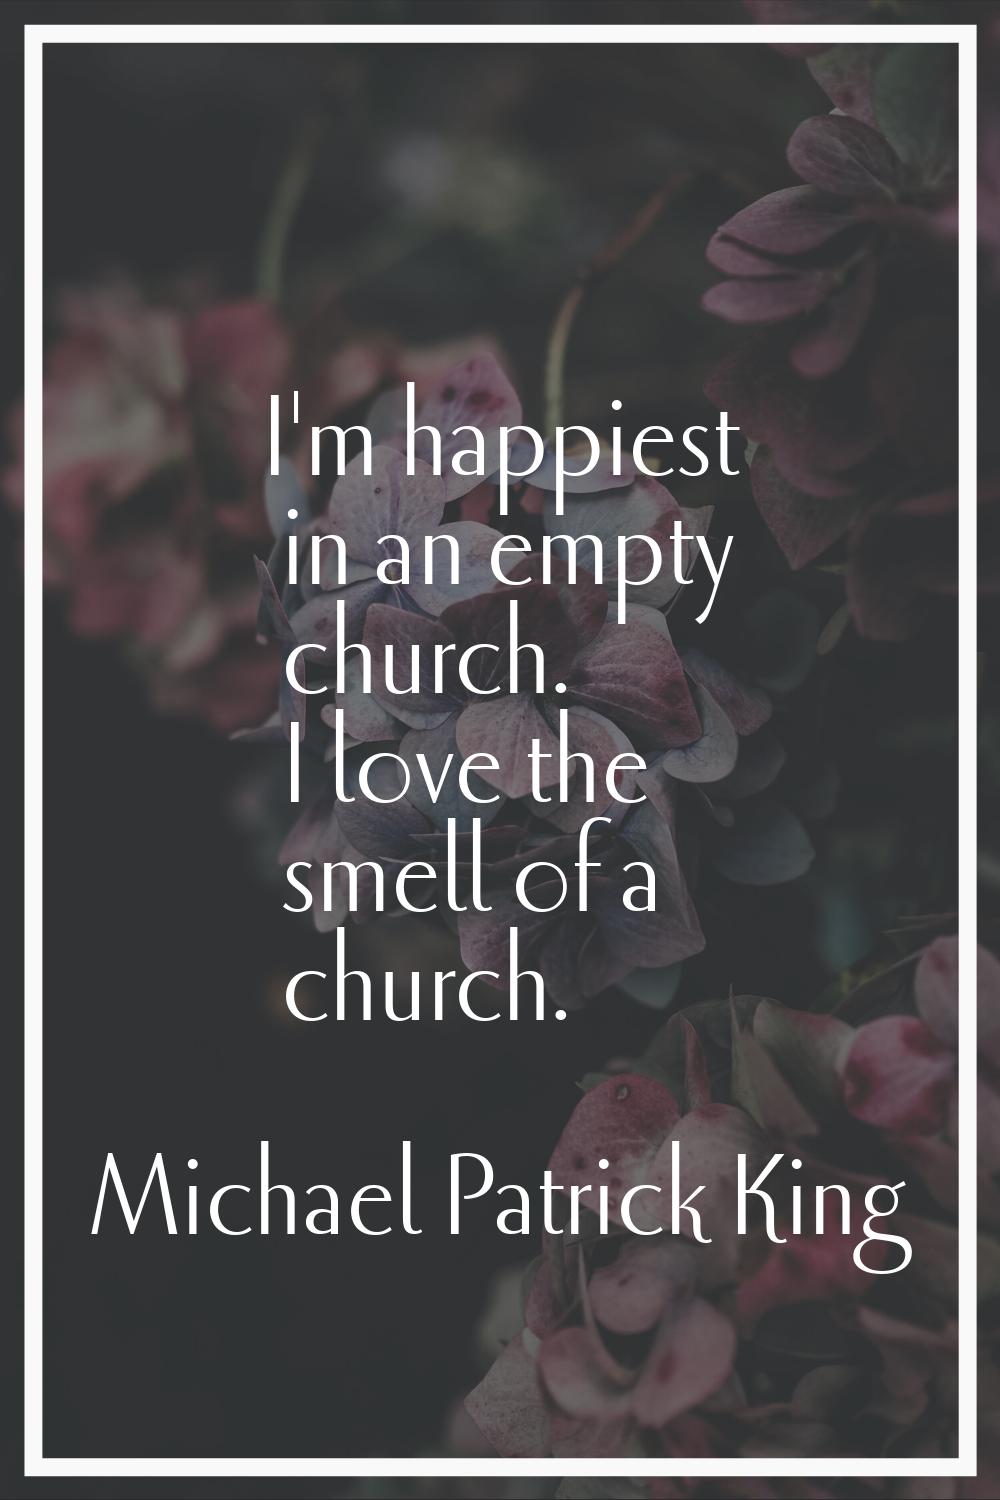 I'm happiest in an empty church. I love the smell of a church.